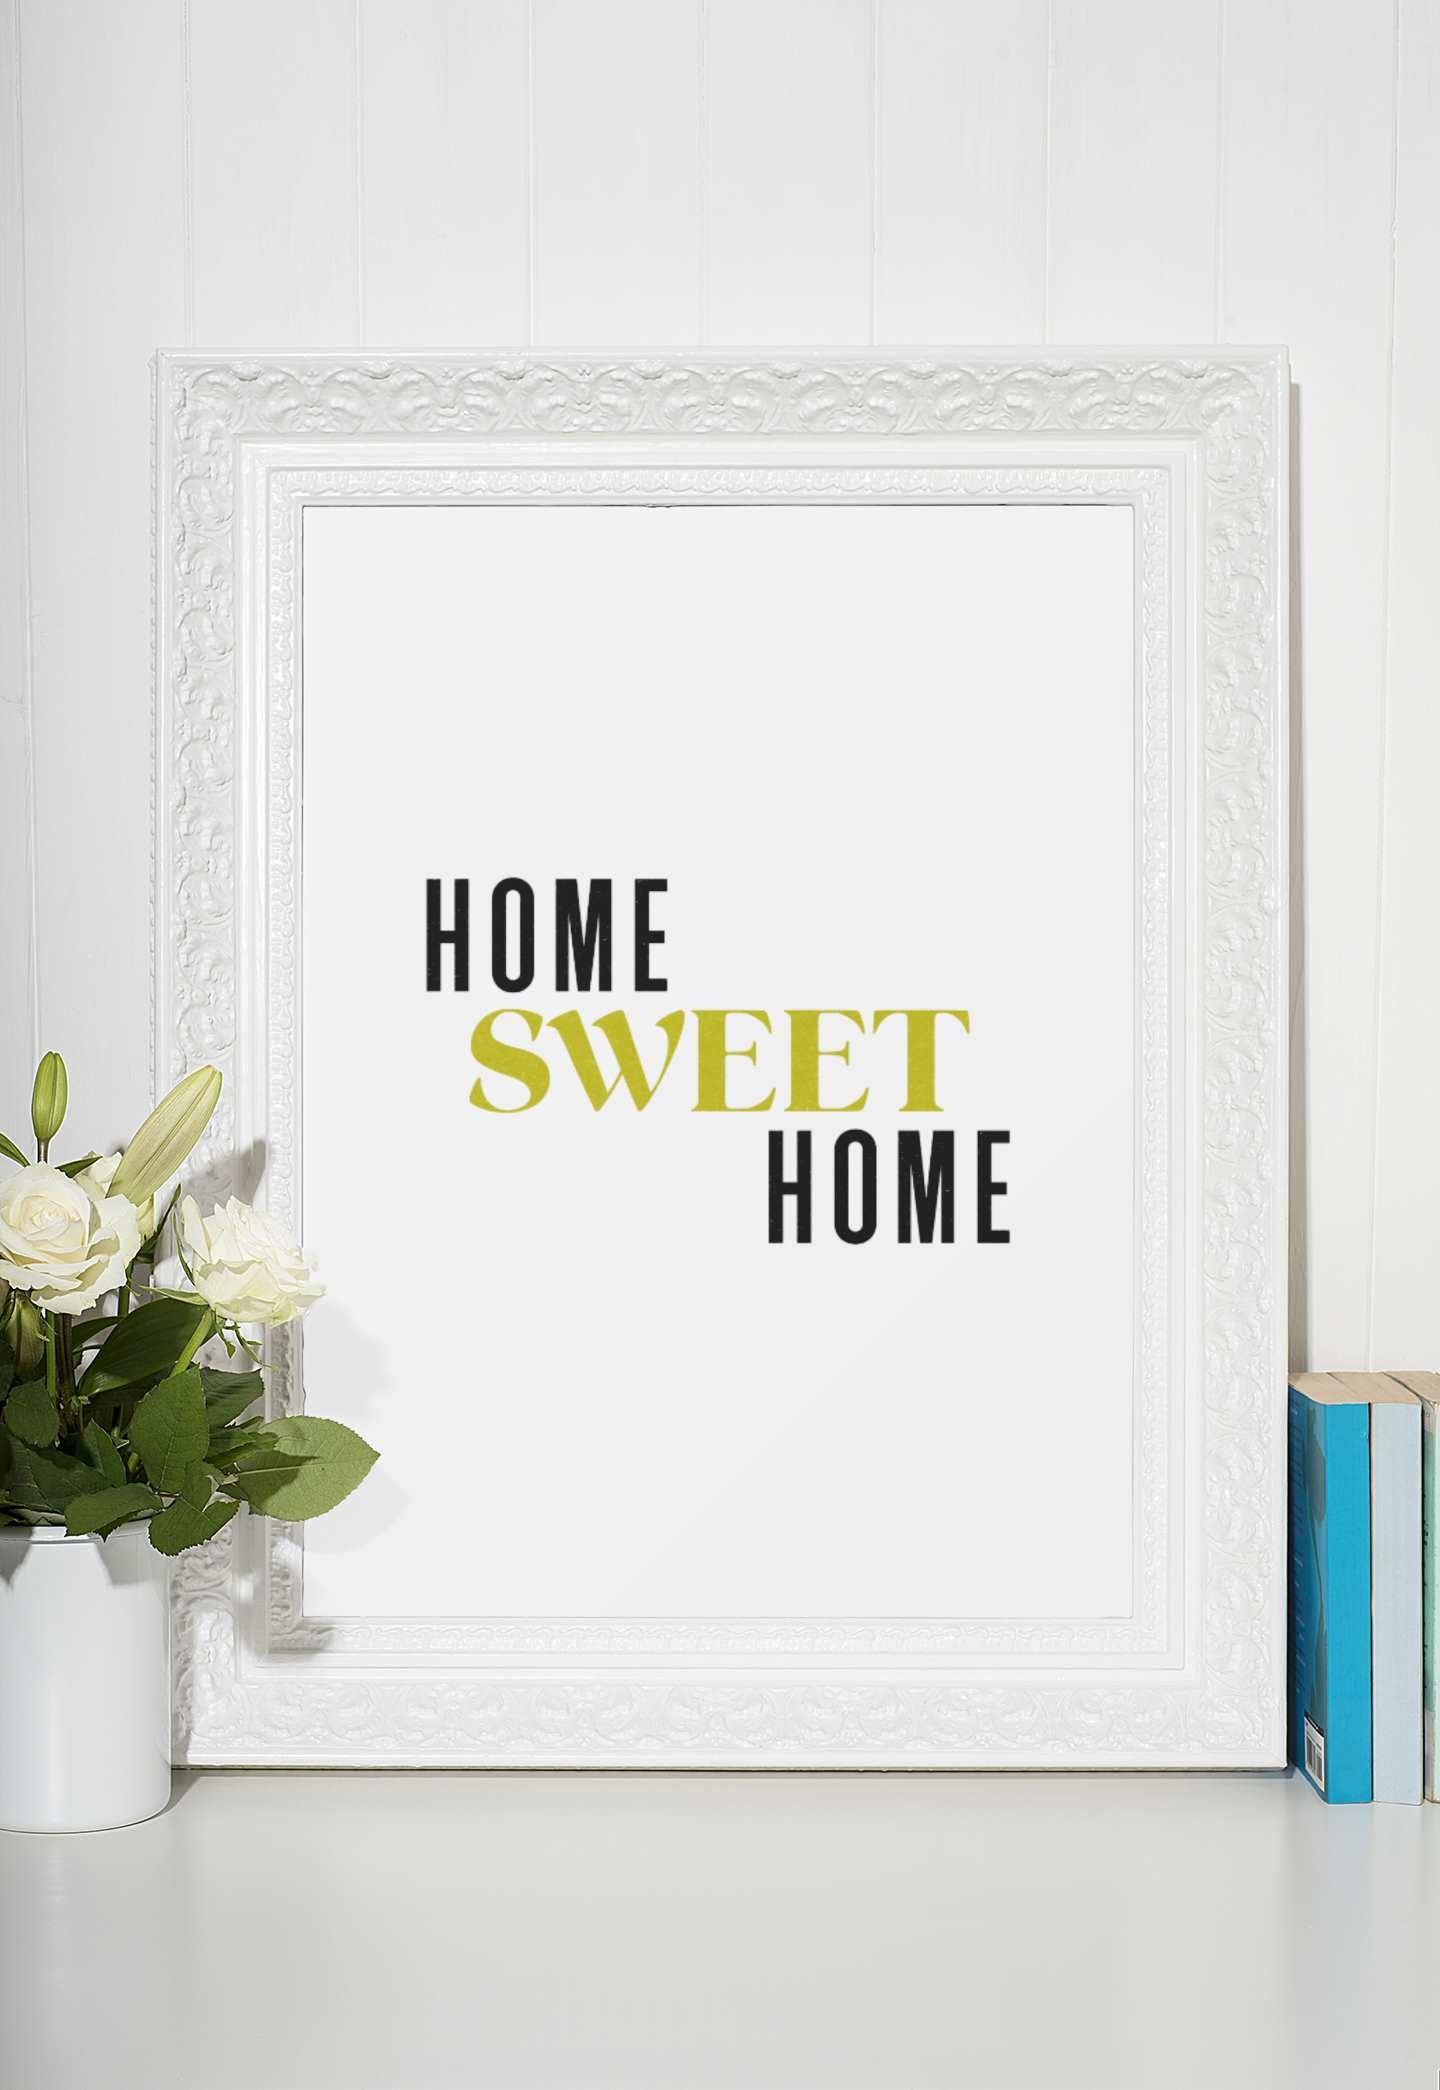 Home Sweet Home Art Print | Unframed 8x10 Typographic Quote 8x10 Wall Decor Sign